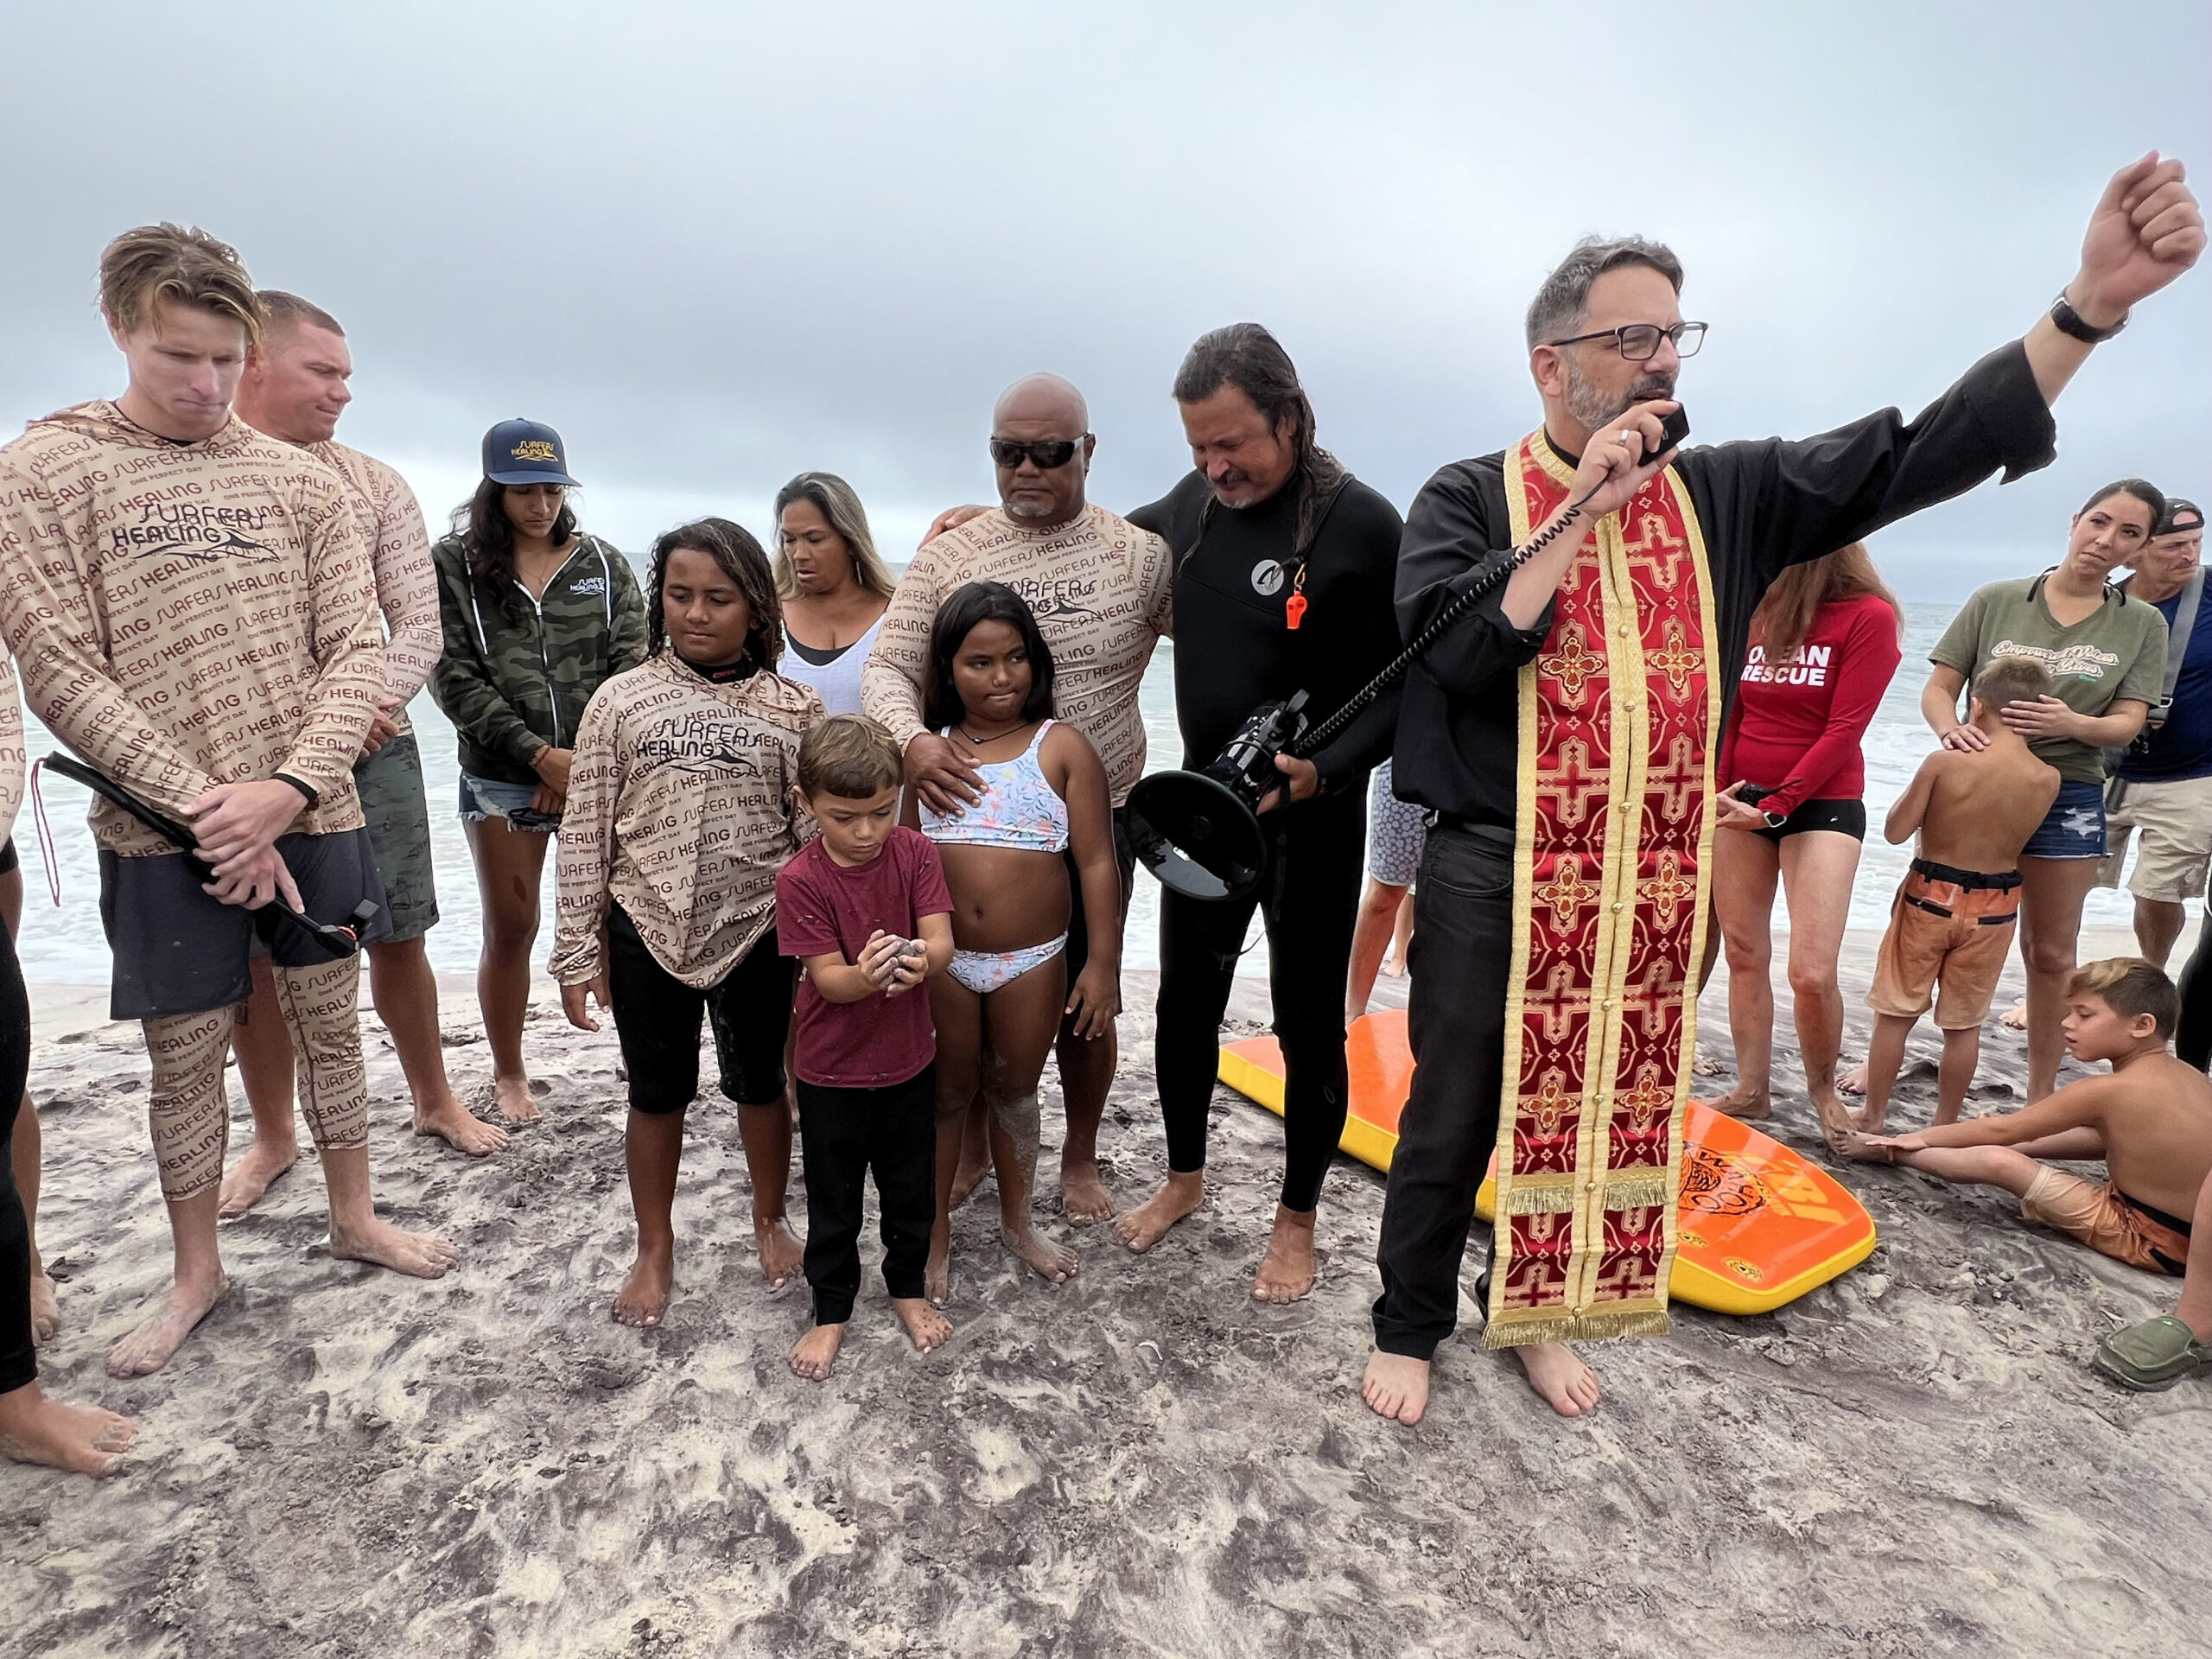 Father Constantine Lazarakis of the Dormition of Virgin Mary Greek Orthodox Church of the Hamptons  offers a prayer at Surfers for Healing at Ponquogue Beach on September 14.  DANA SHAW